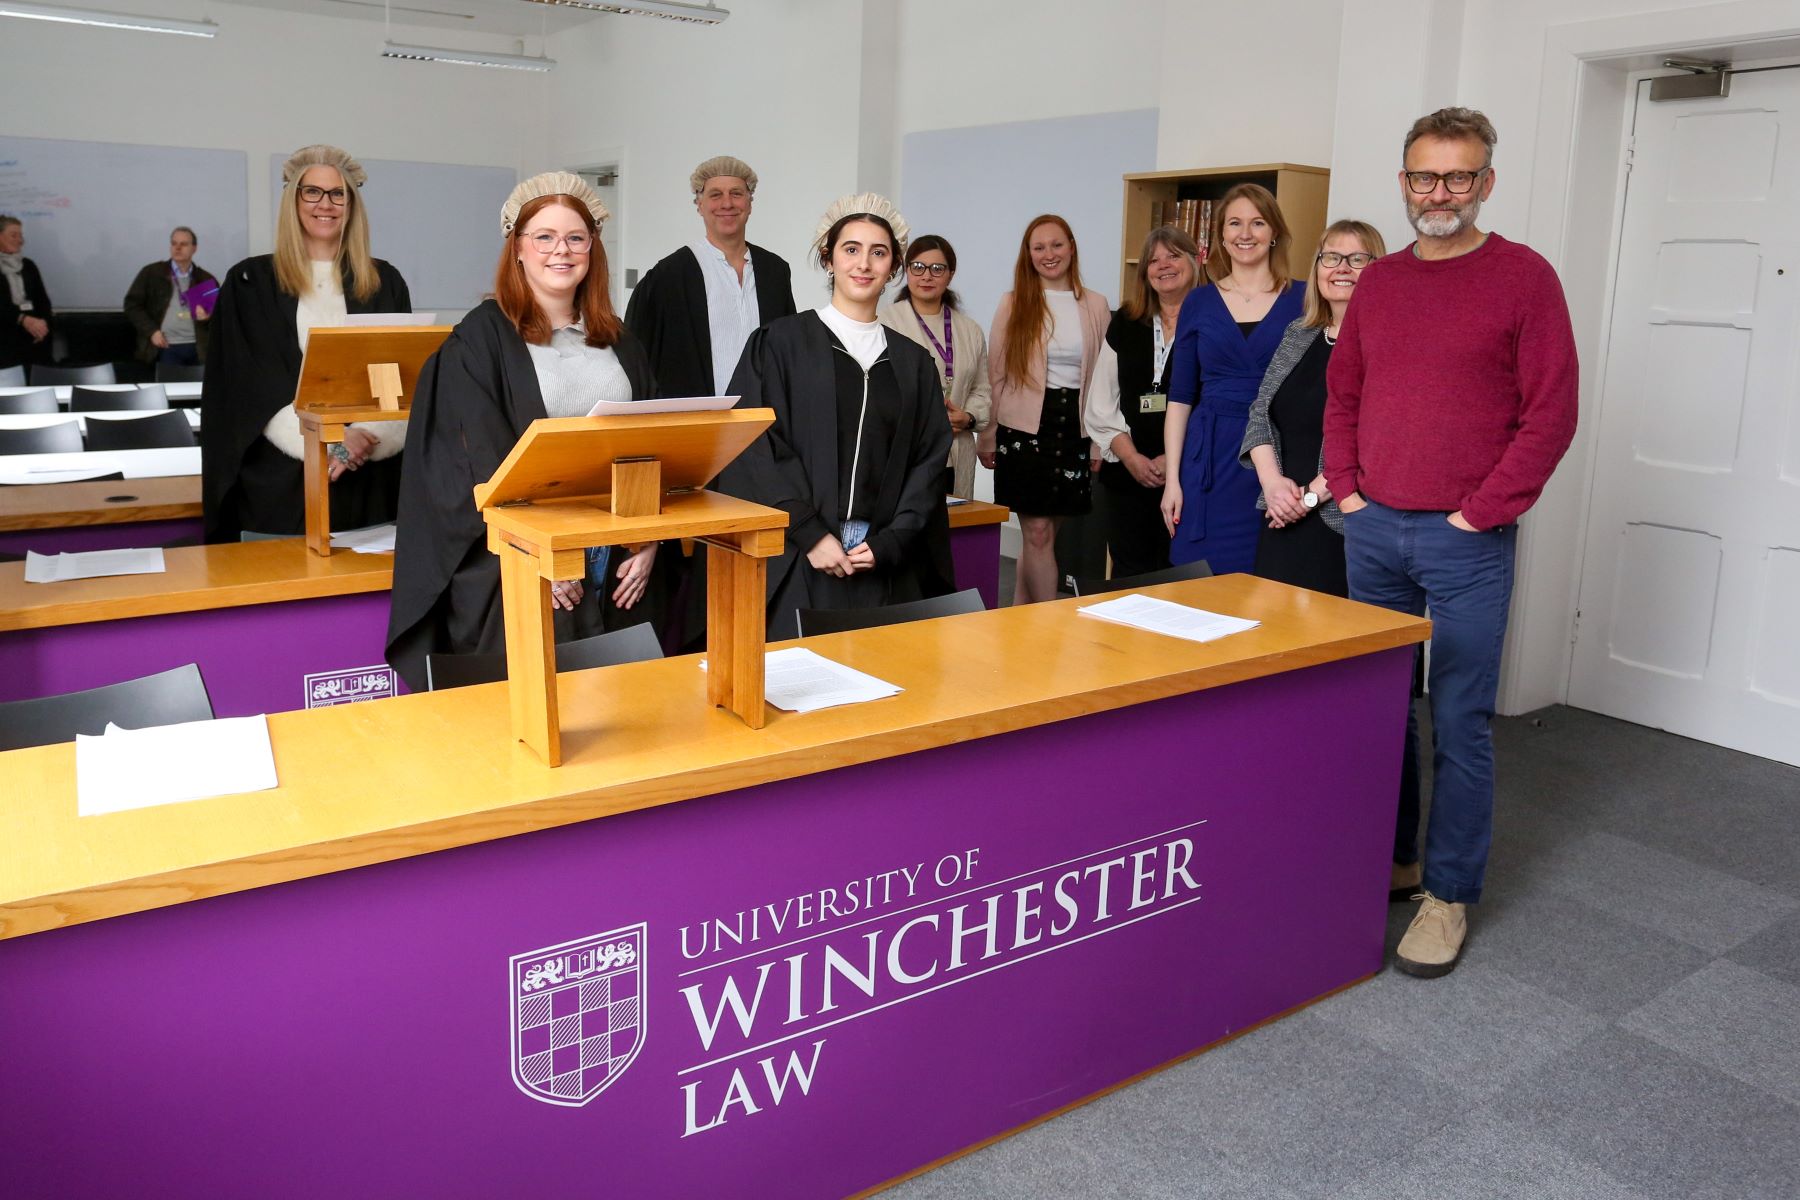 Law students in gowns behind purple desk saying  University of Winchester